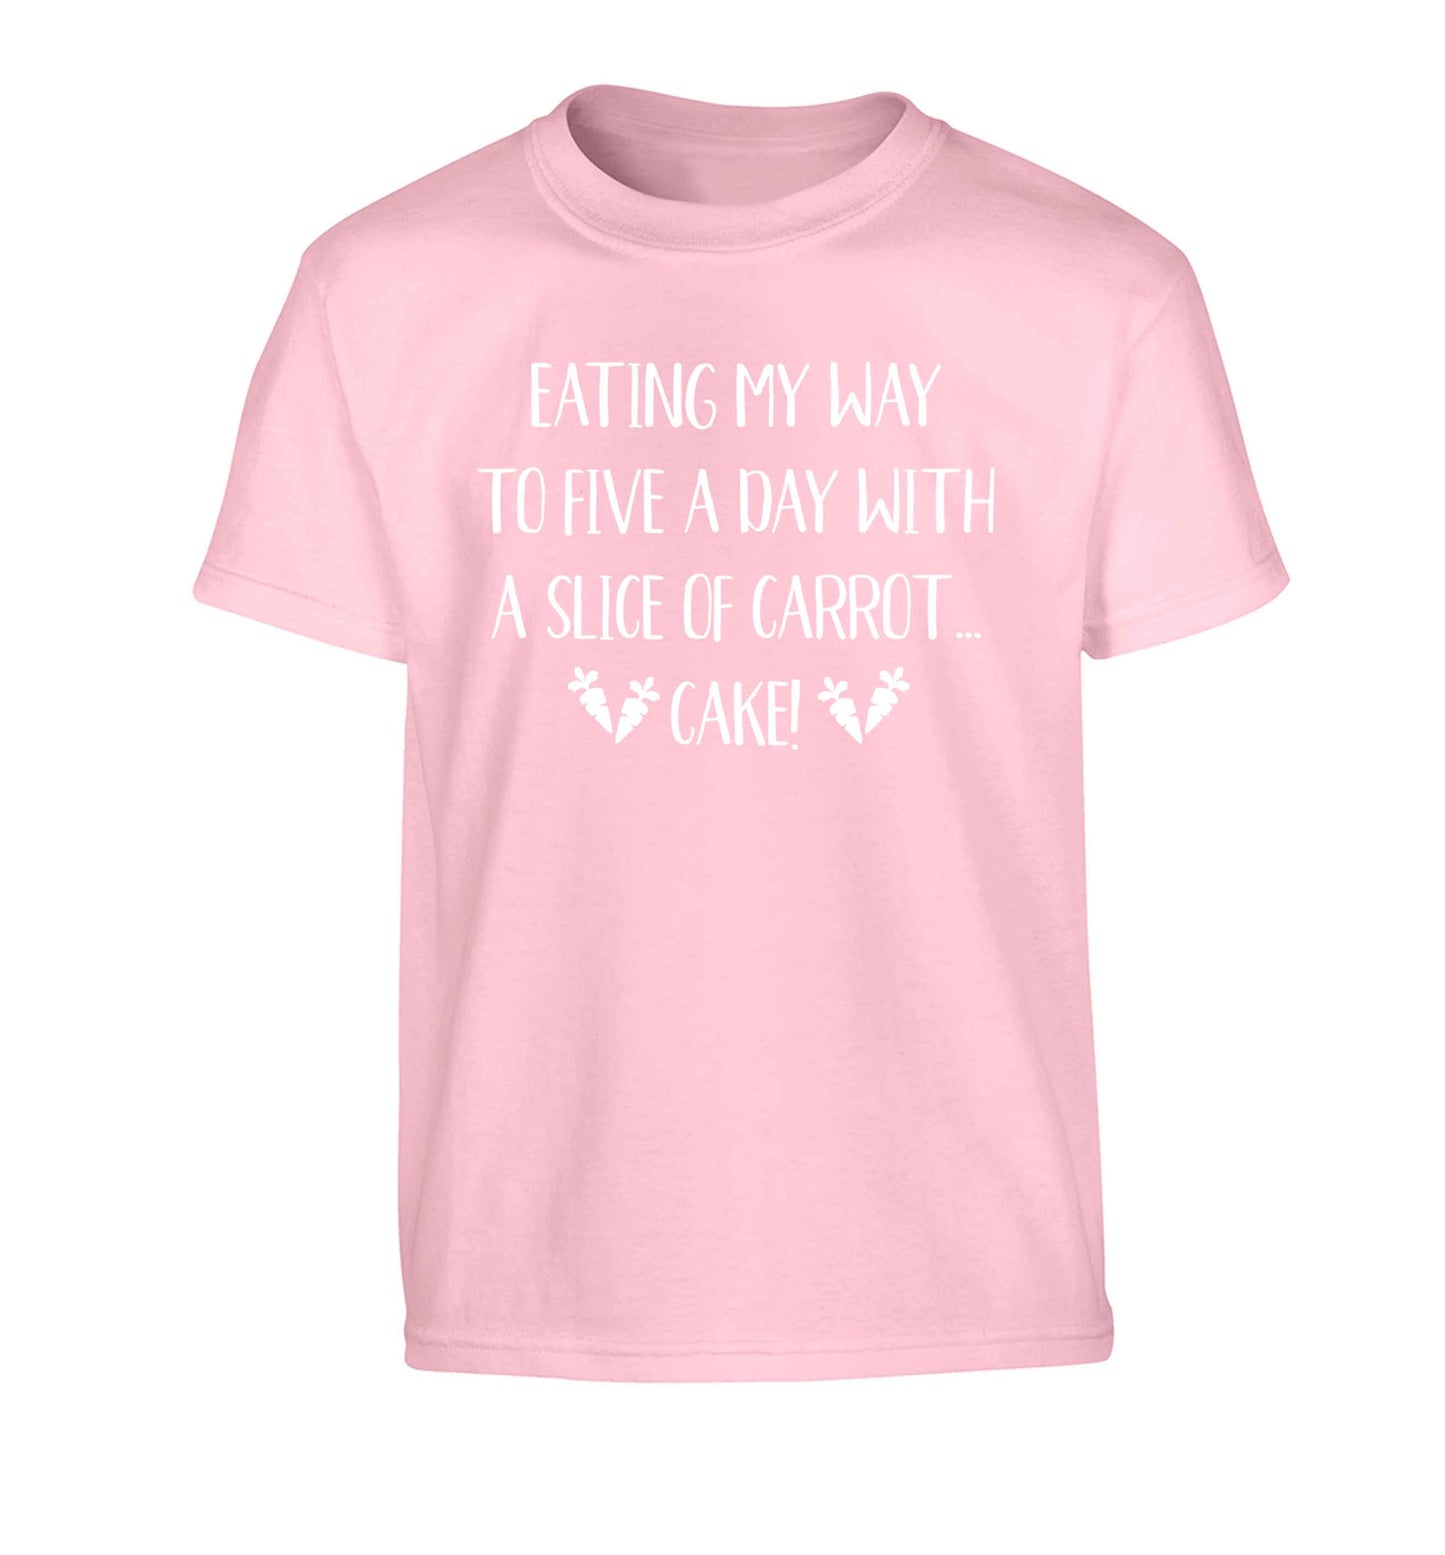 Eating my way to five a day with a slice of carrot cake day Children's light pink Tshirt 12-13 Years